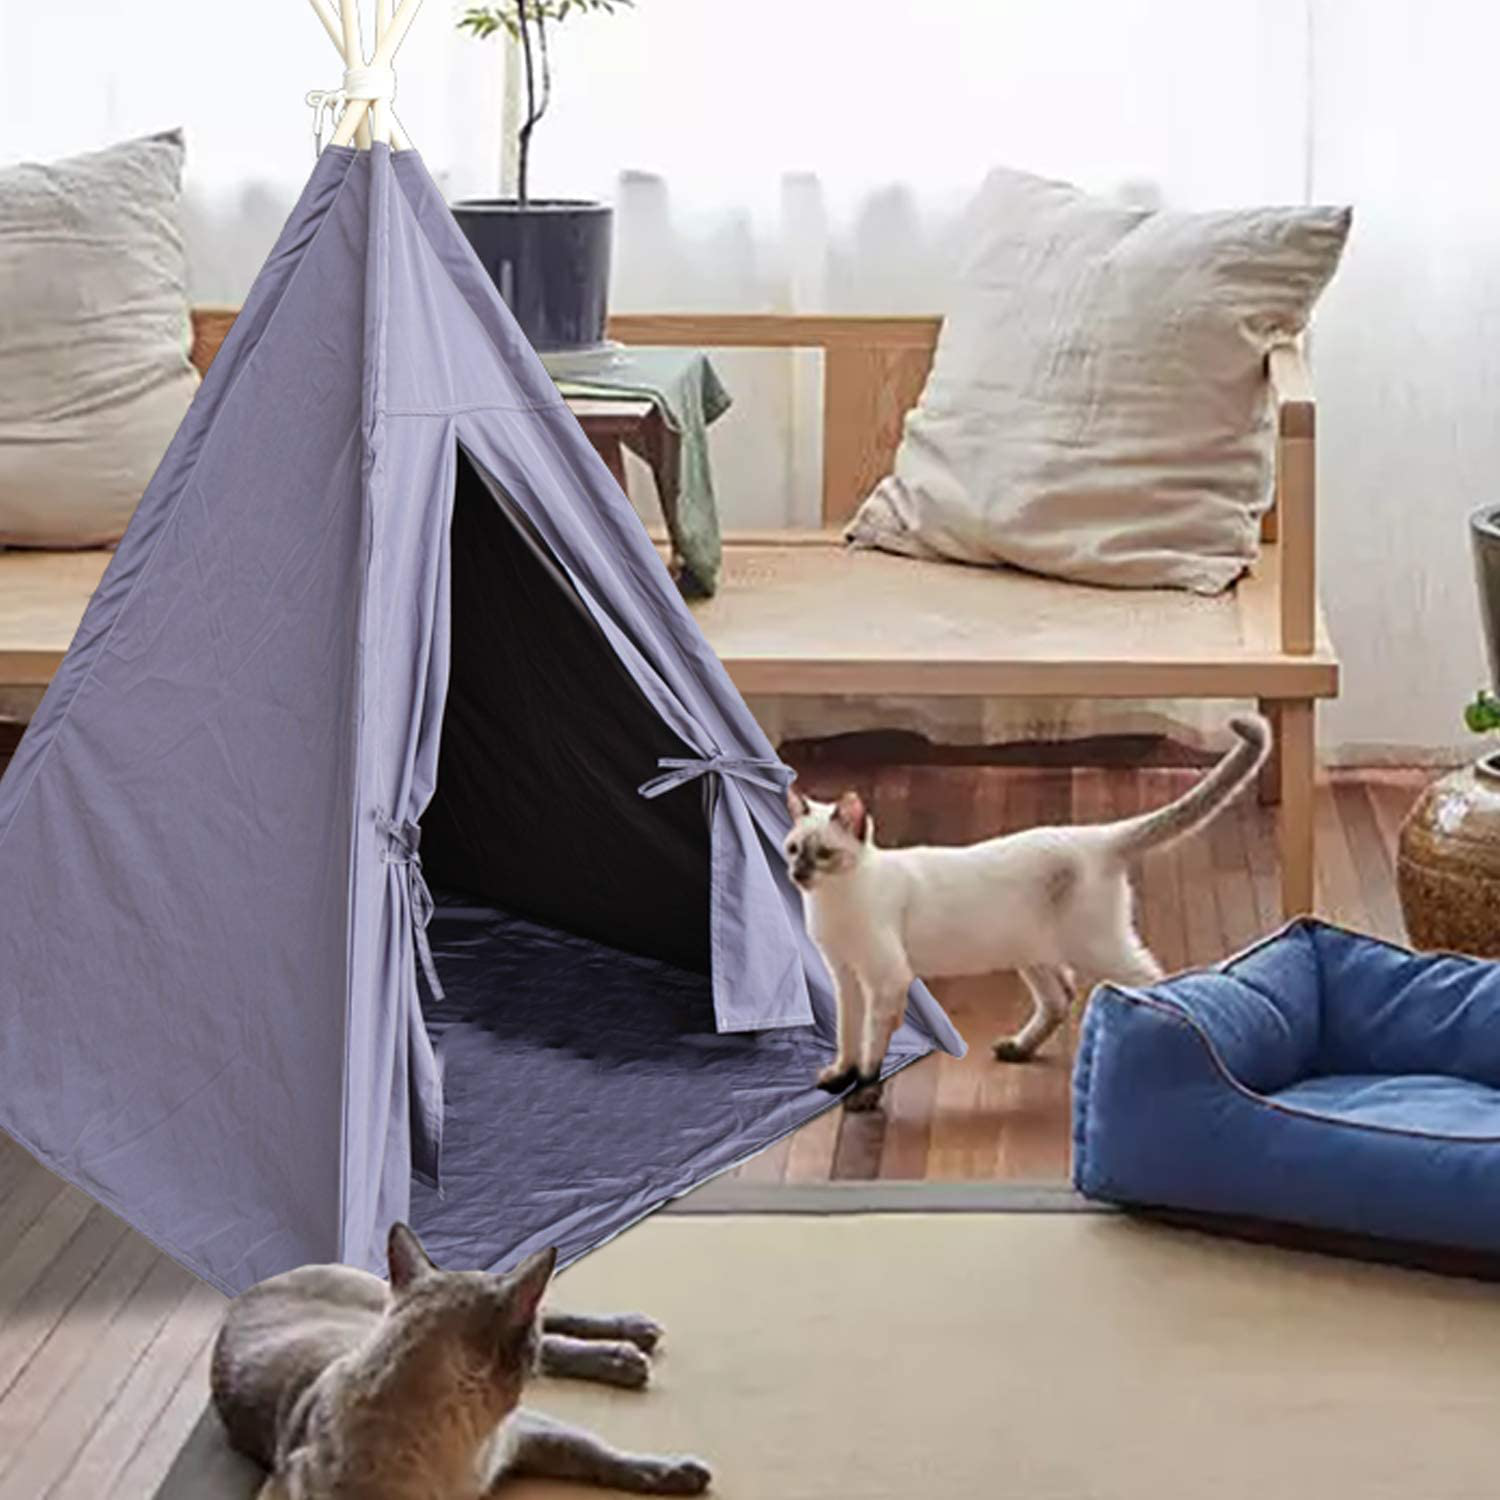 Ukadou Dog Teepee Medium for Pet Teepee Dog Tents for Large Dogs, 36Inch Pet Teepee with Floor Mat, Portable Dog House with Fixator and Blackboard Animals & Pet Supplies > Pet Supplies > Dog Supplies > Dog Houses Ukadou   